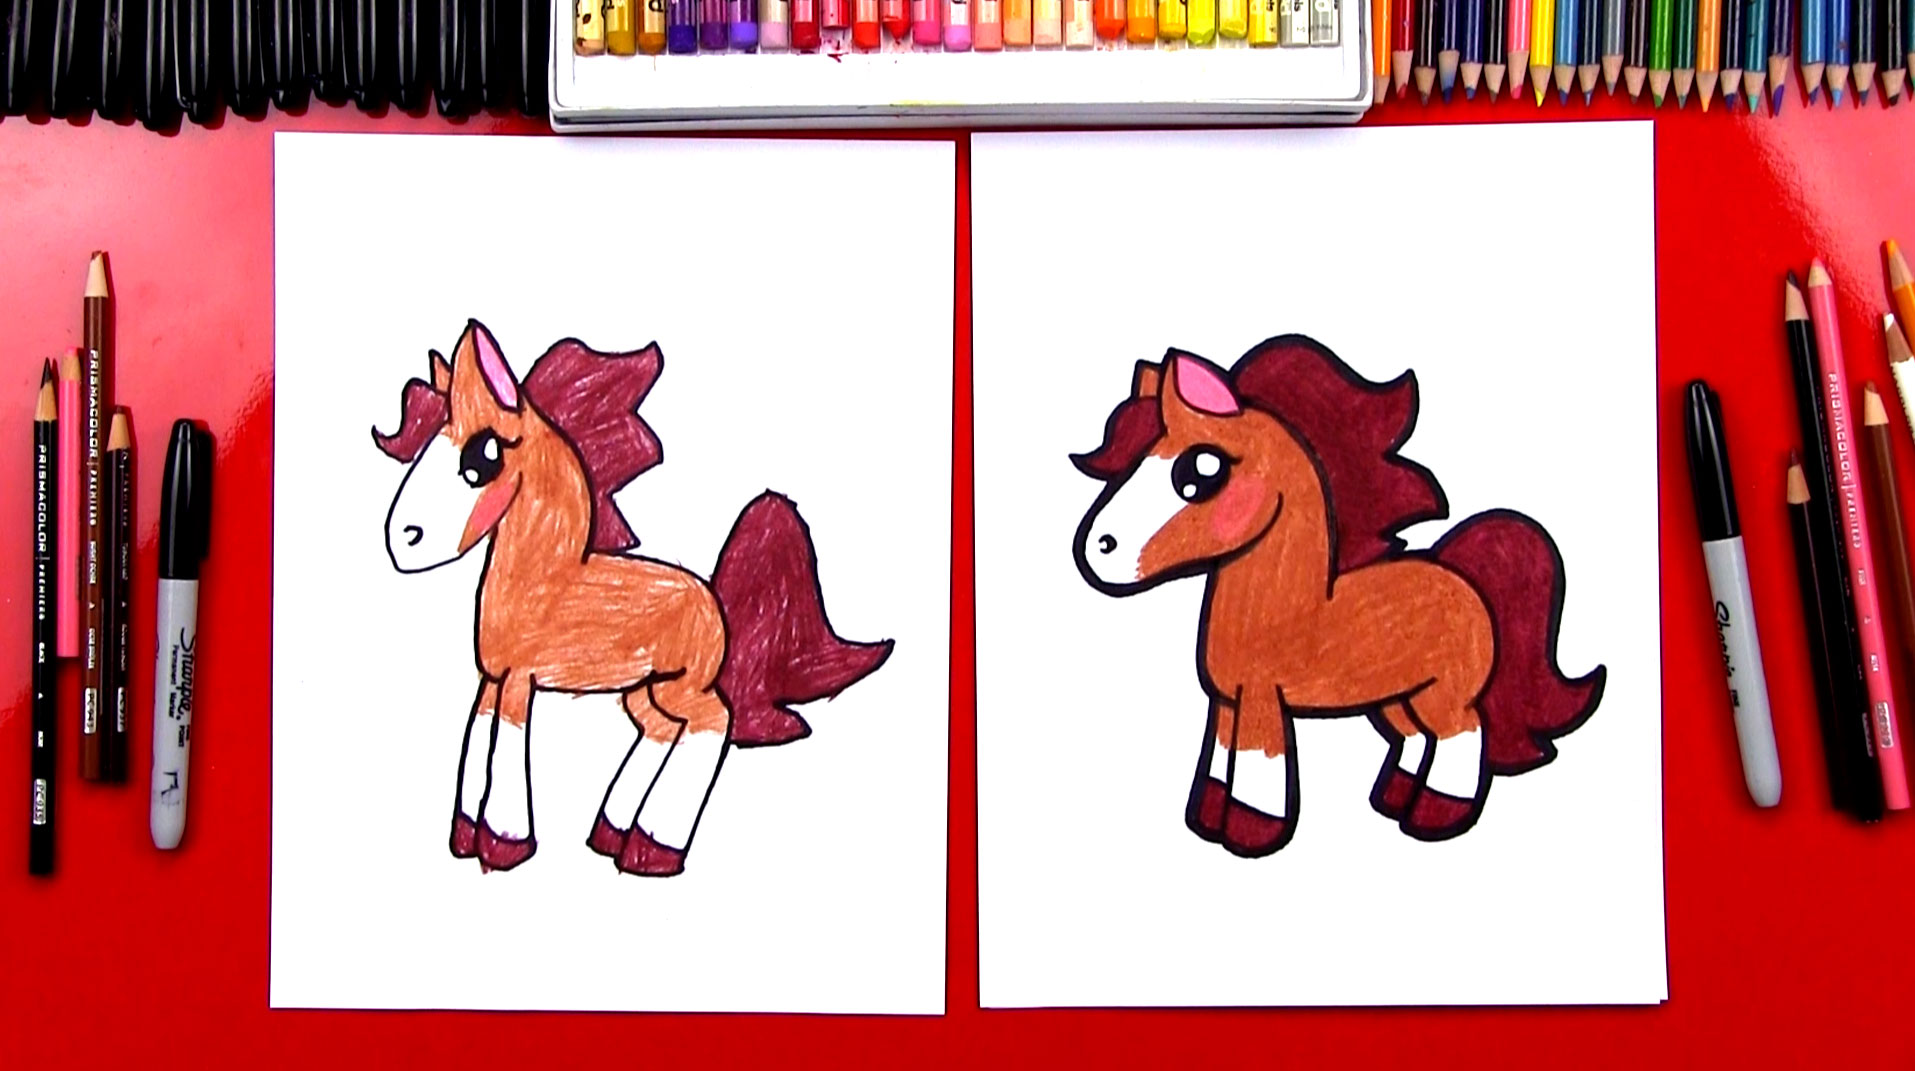 Horse Drawing - How To Draw A Horse Step By Step!